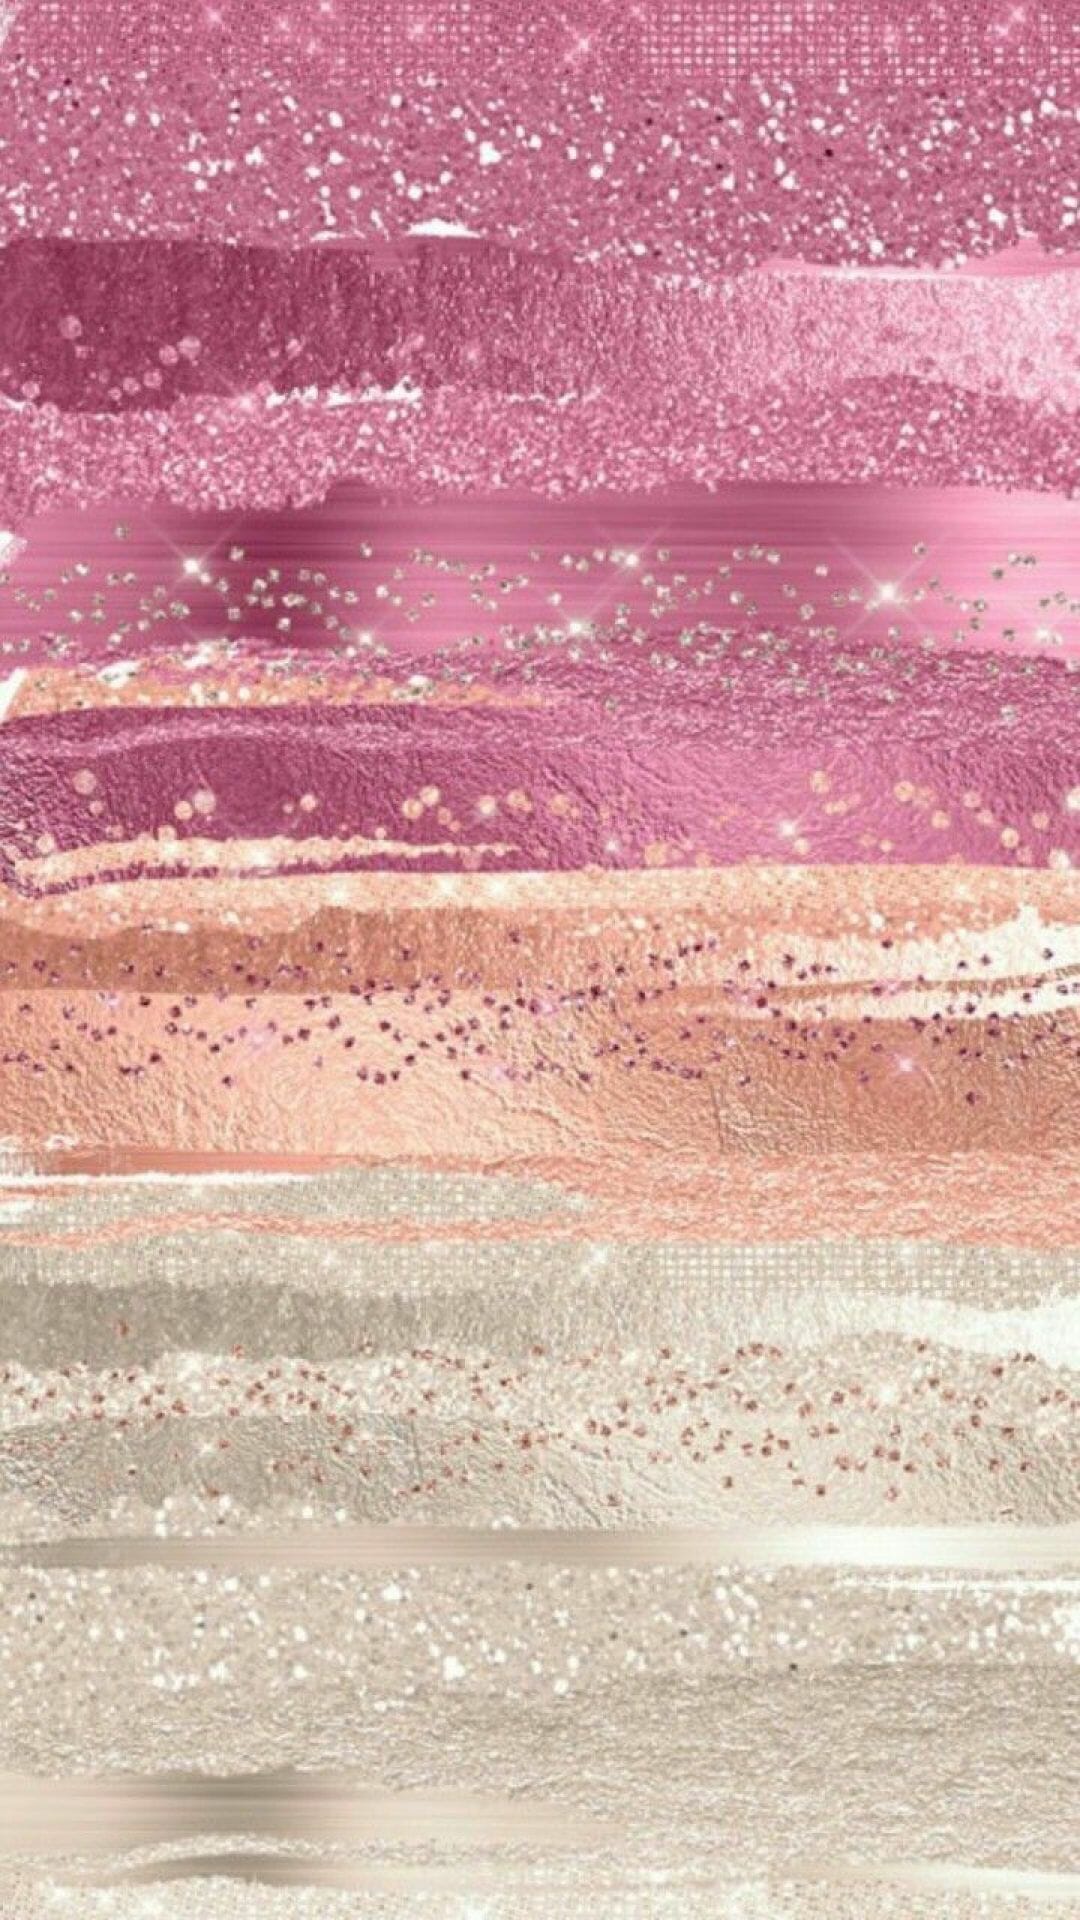 IPhone wallpaper with abstract glitter design in shades of pink, gold, and white - Rose gold, gold